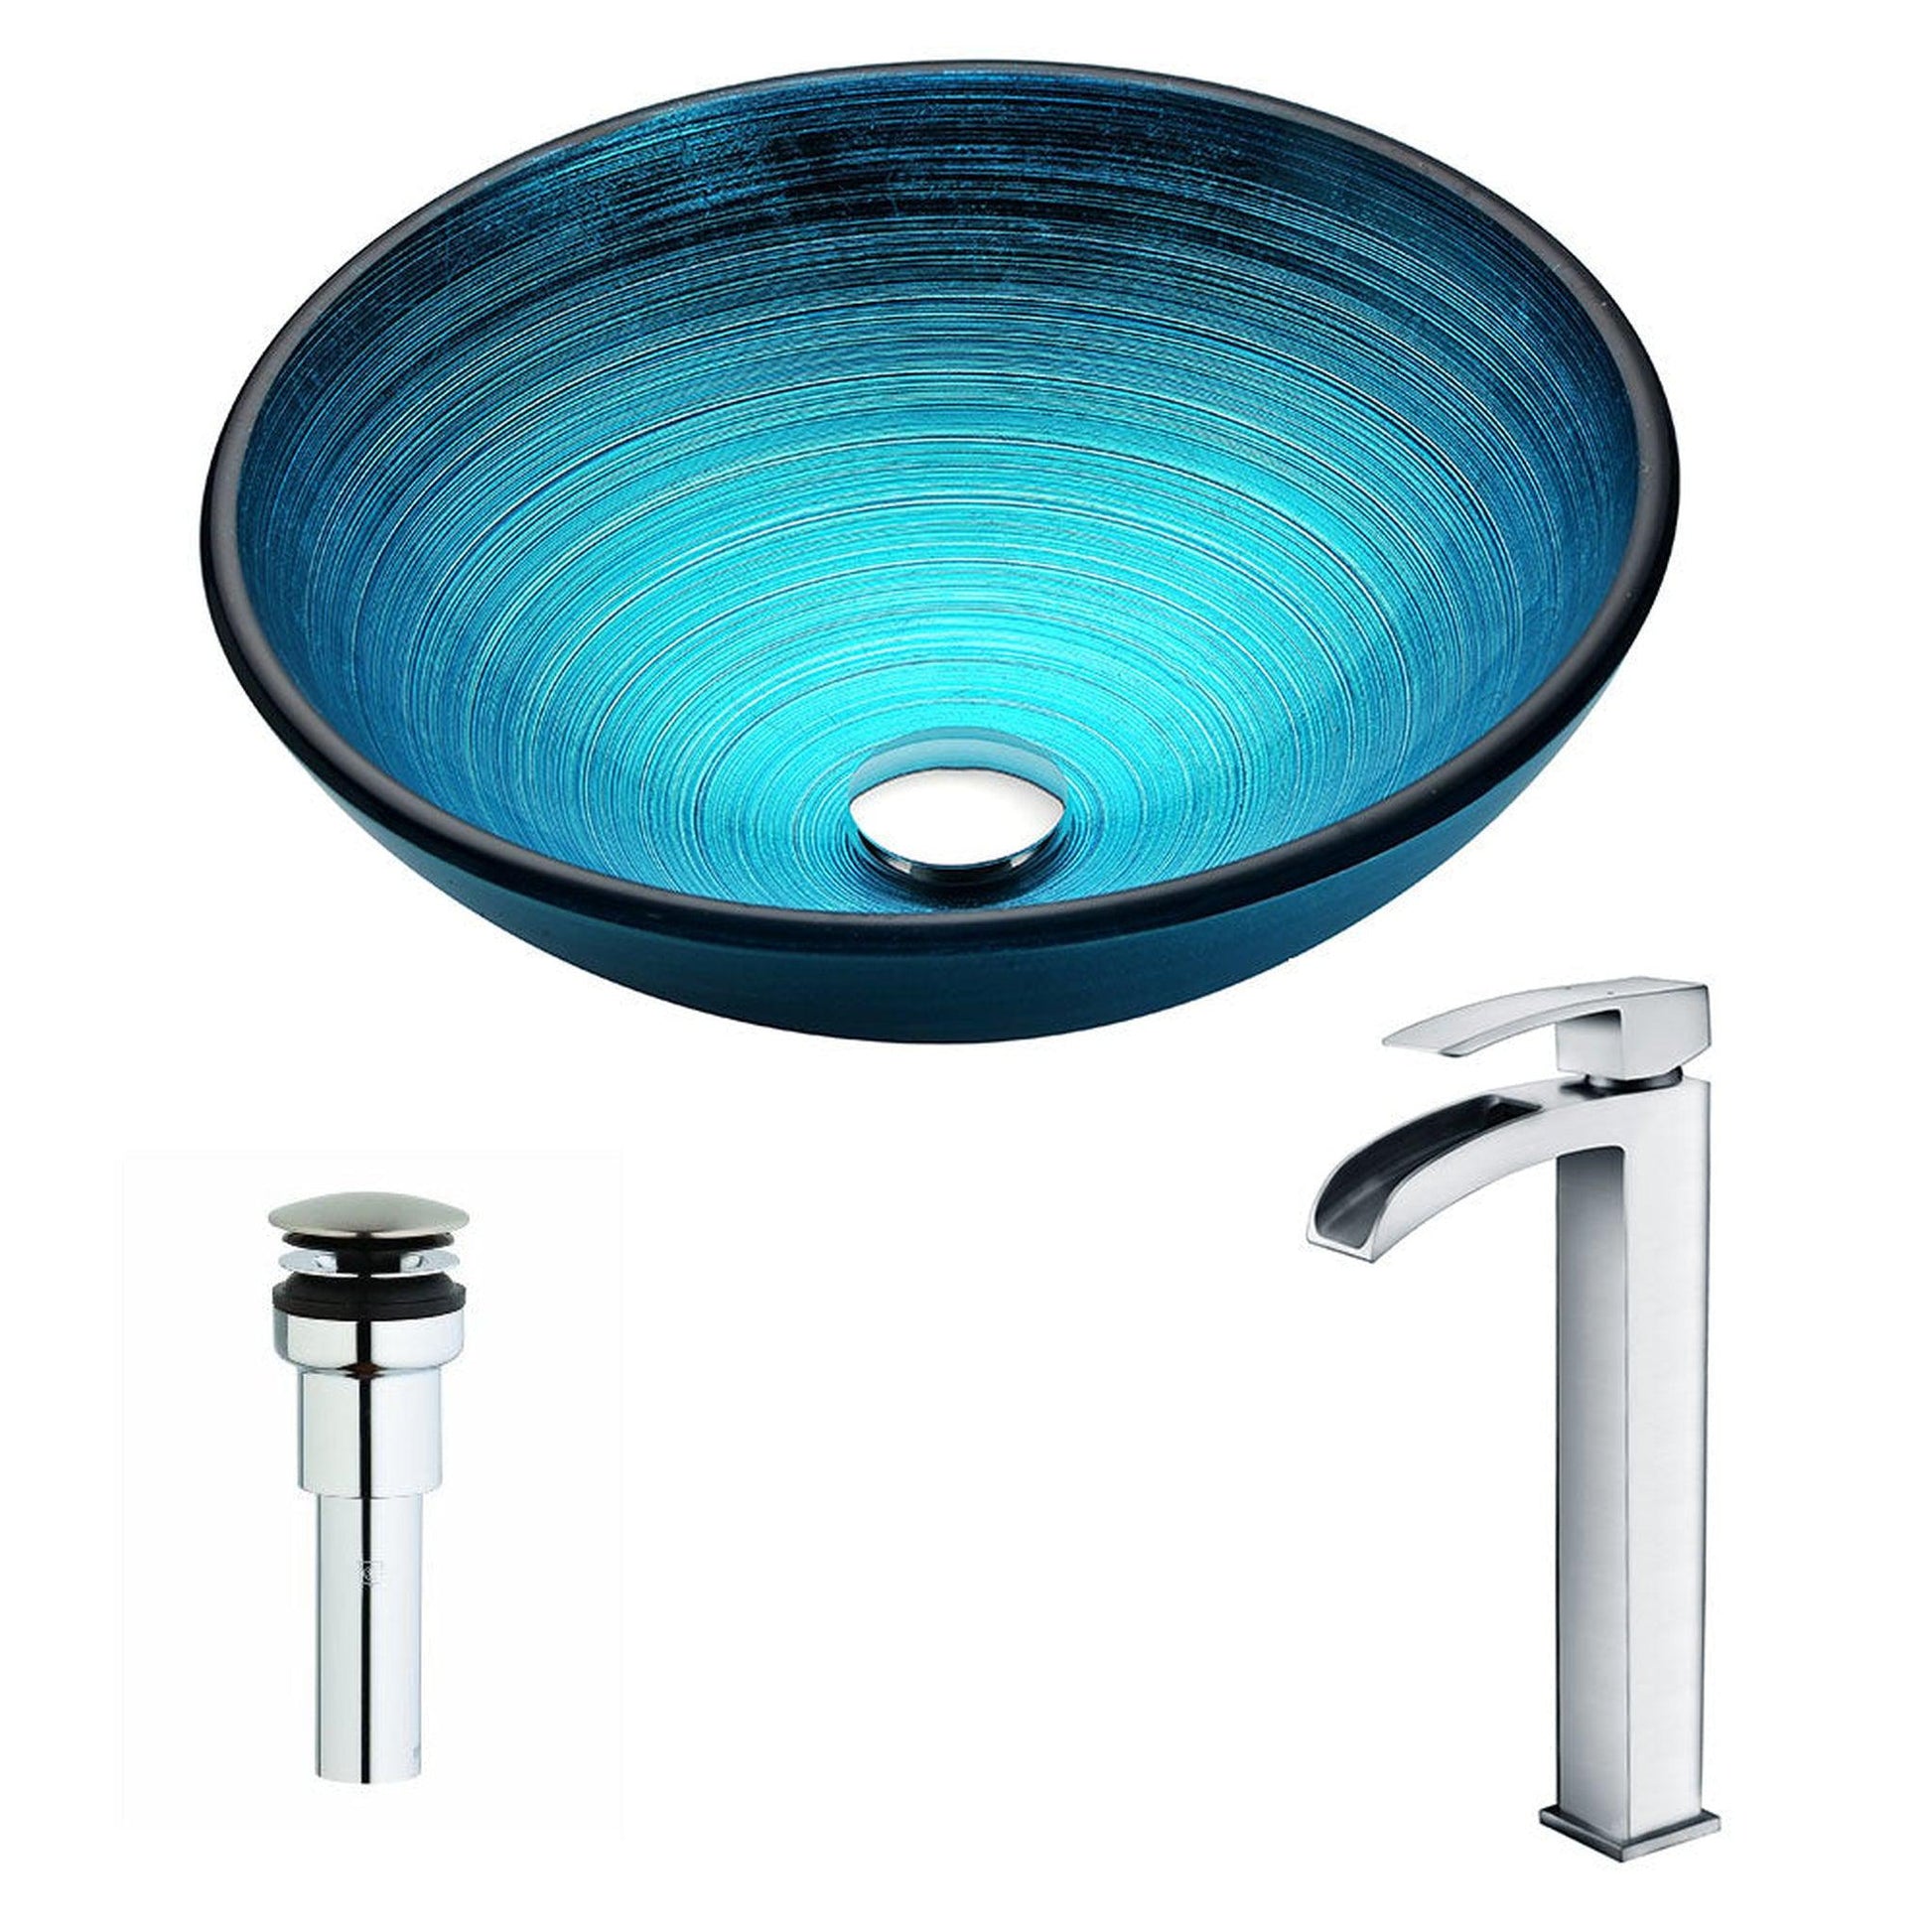 ANZZI Enti Series 17" x 17" Round Lustrous Blue Deco-Glass Vessel Sink With Chrome Pop-Up Drain and Key Faucet